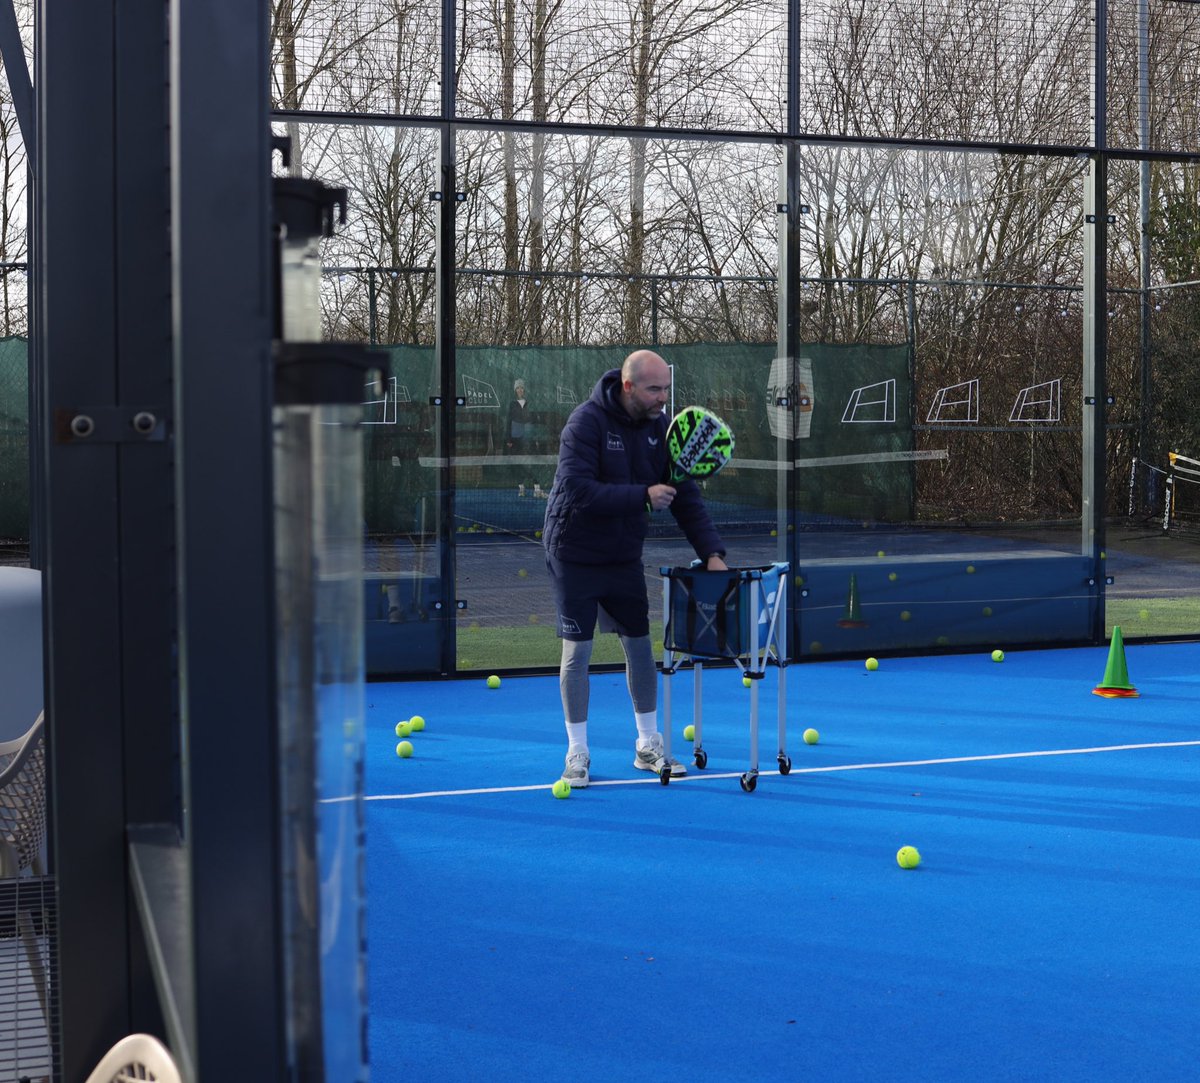 Big padel news coming….we can’t wait to tell you 🎾